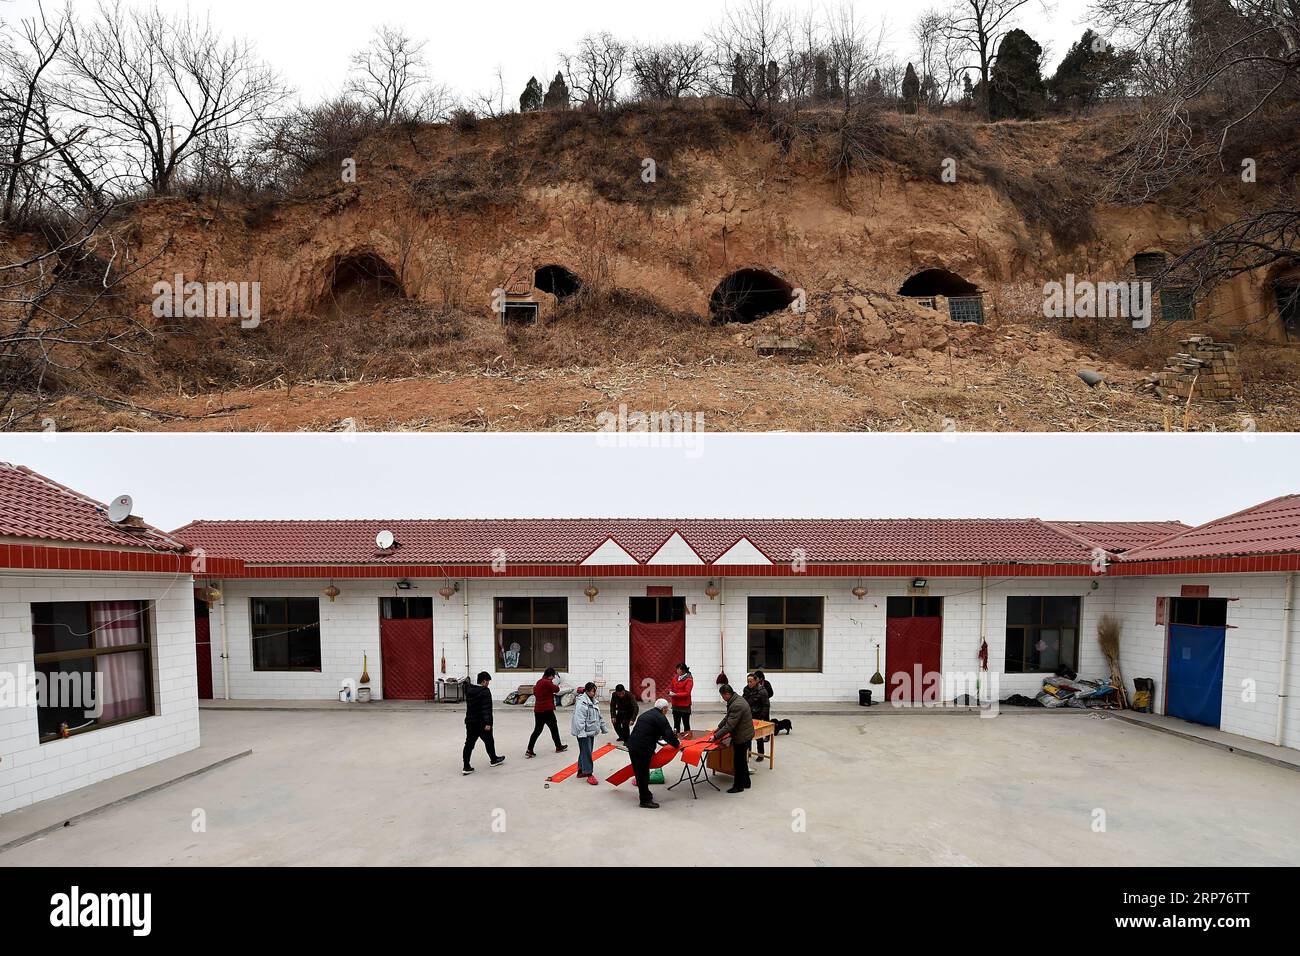 (190129) -- WENXI COUNTY, Jan. 29, 2019 (Xinhua) -- This combination photo shows abandoned cave dwellings in Shibaping Village near Zhangcailing Village (top, photo taken on Jan. 27, 2019) and the Home of Happiness poverty-alleviation settlement in Zhangcailing Village of Yangyu Township, Wenxi County, north China s Shanxi Province (bottom, photo taken on Jan. 27, 2019). For generations, residents of Zhangcailing Village barely scraped a living as a result of geographical isolation, poor infrastructure and lack of supporting industries. To help pull villagers out of poverty, the government inc Stock Photo